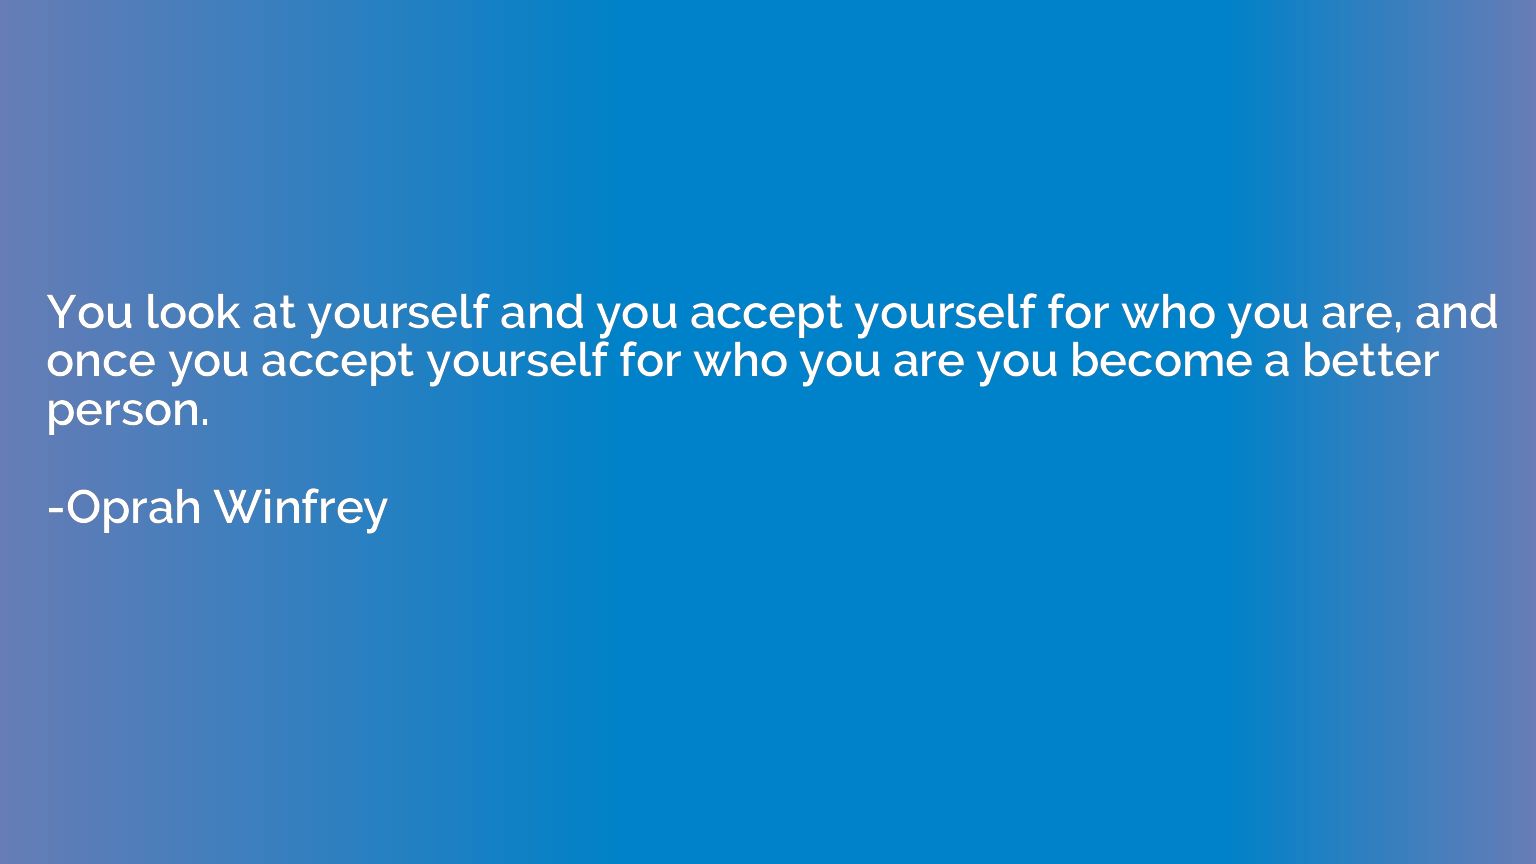 You look at yourself and you accept yourself for who you are